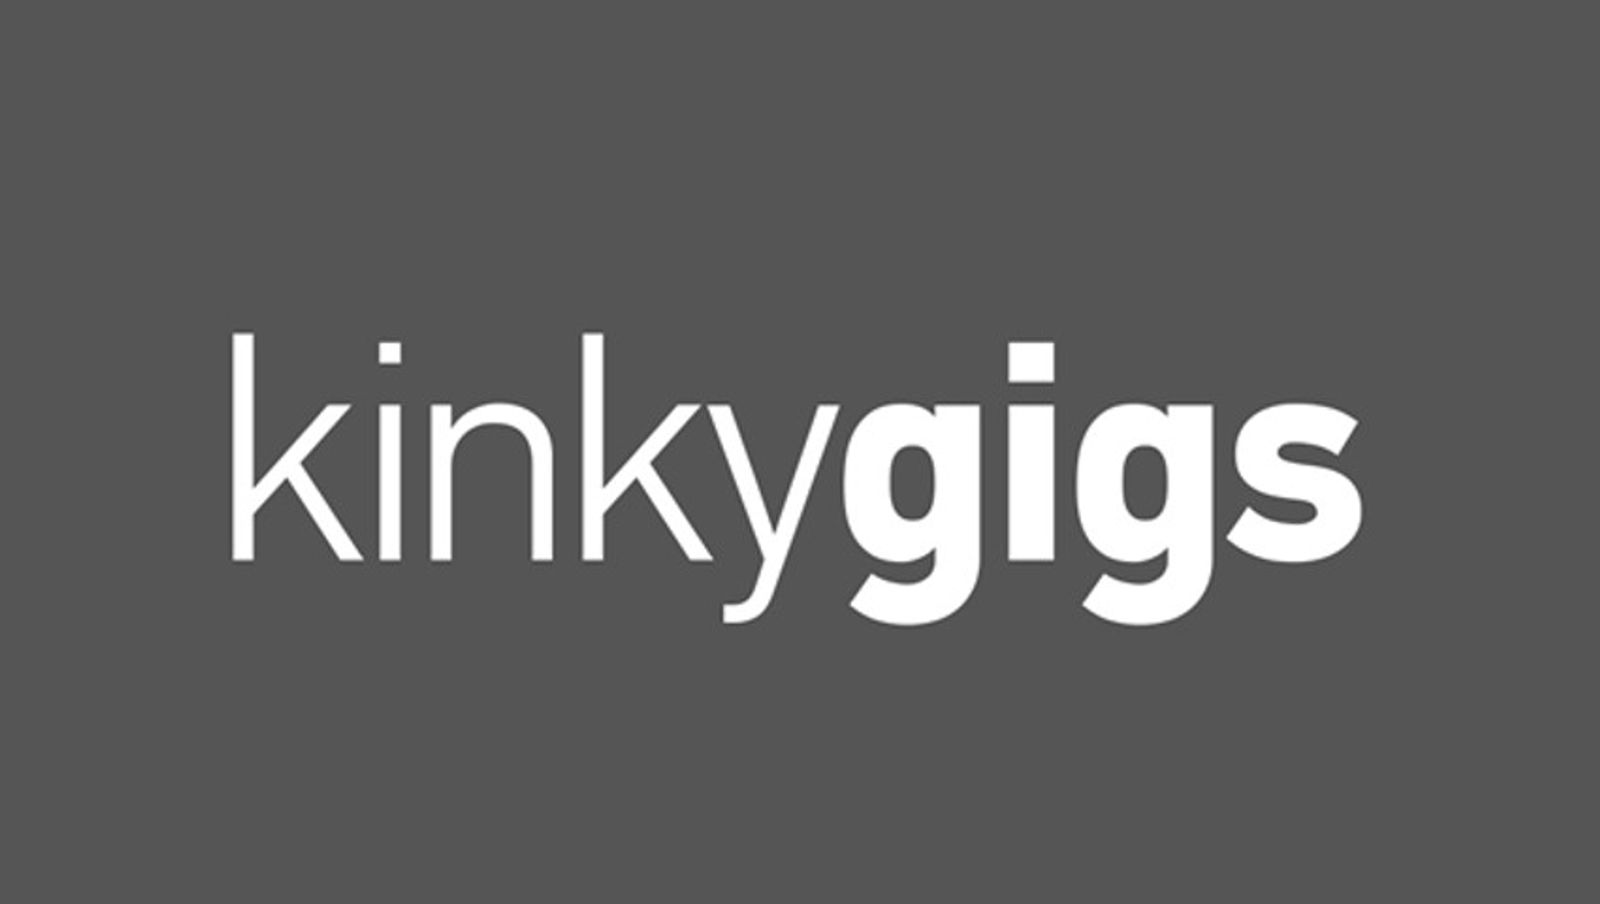 Kinkygigs Launches Community for Fetish, Adult Talent